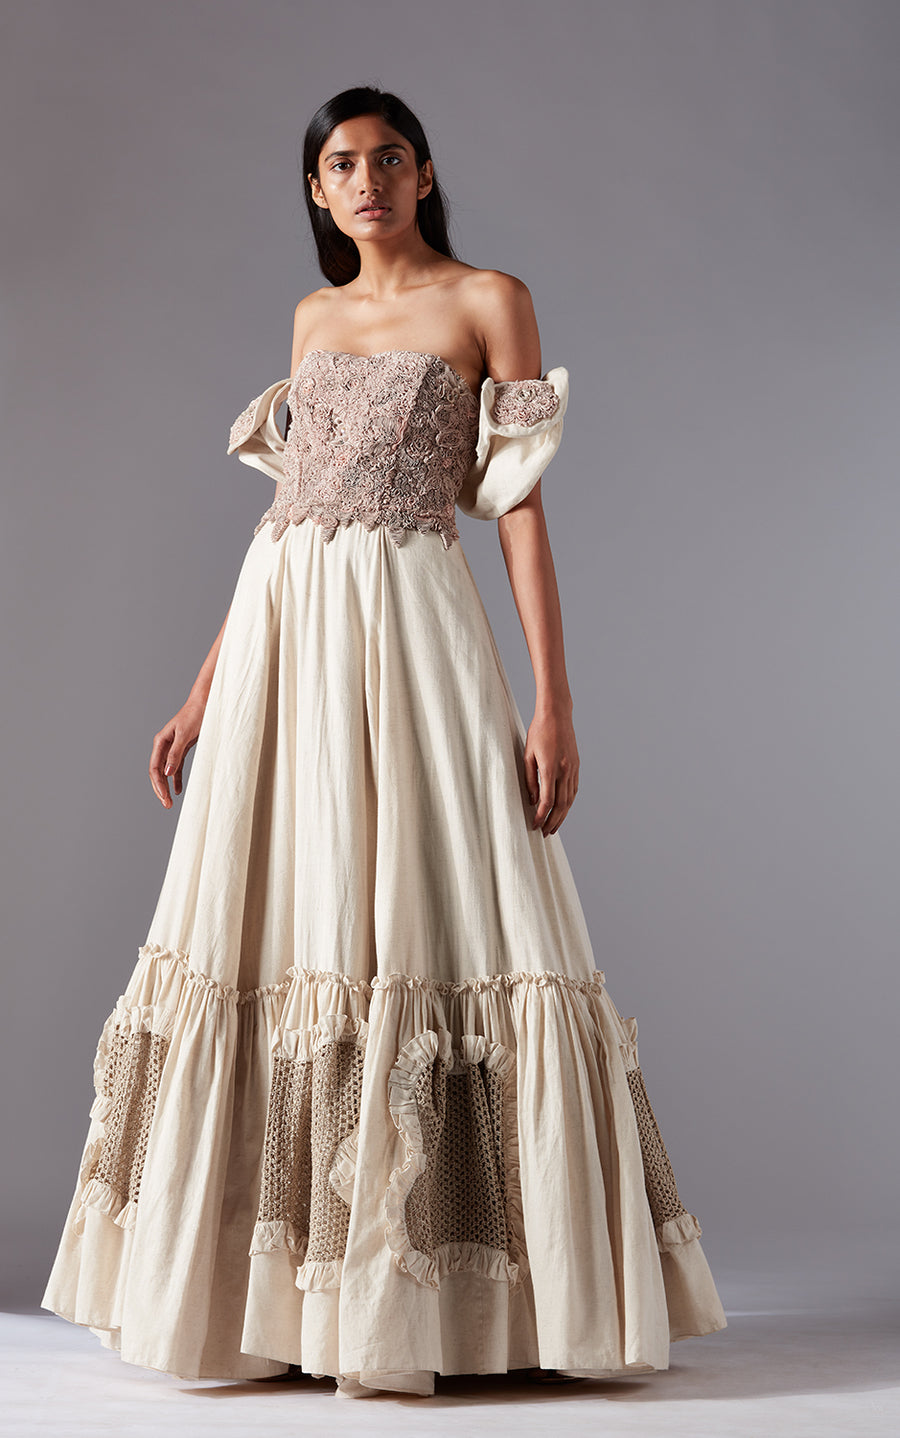 Arabesque Floating Gown